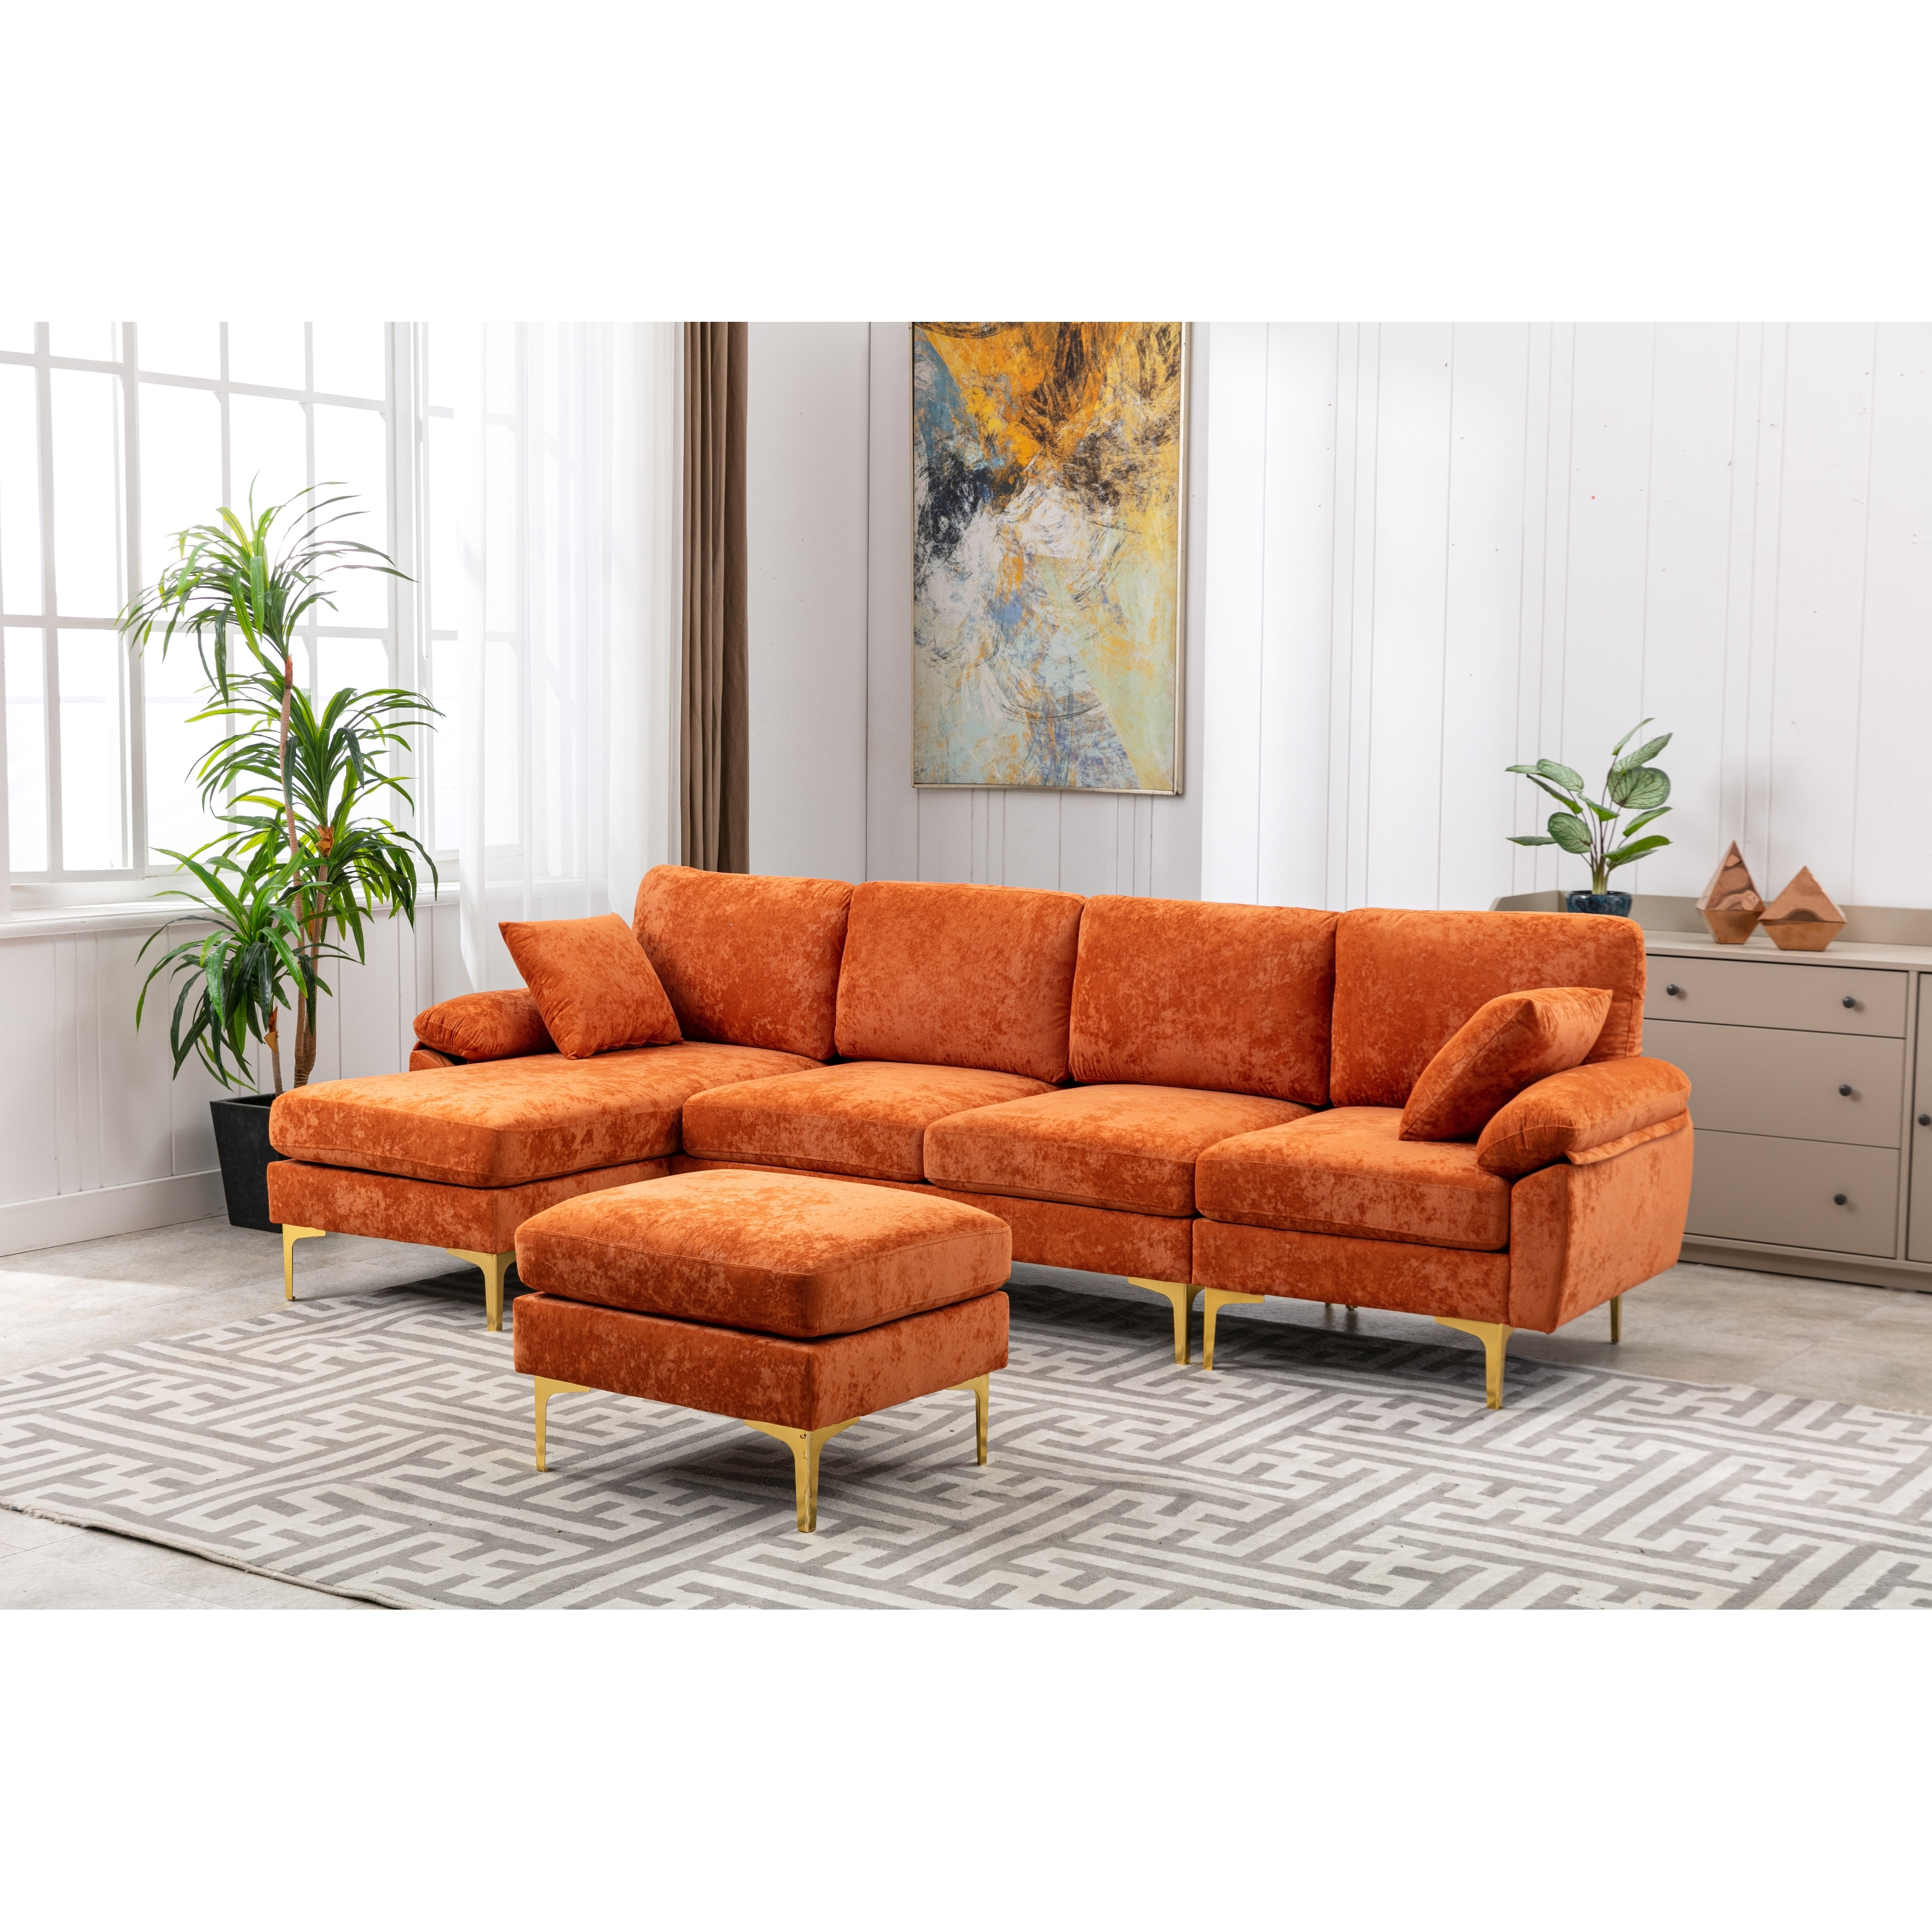 Morden 4-seater Polyester Sectional Sofa For Living Room